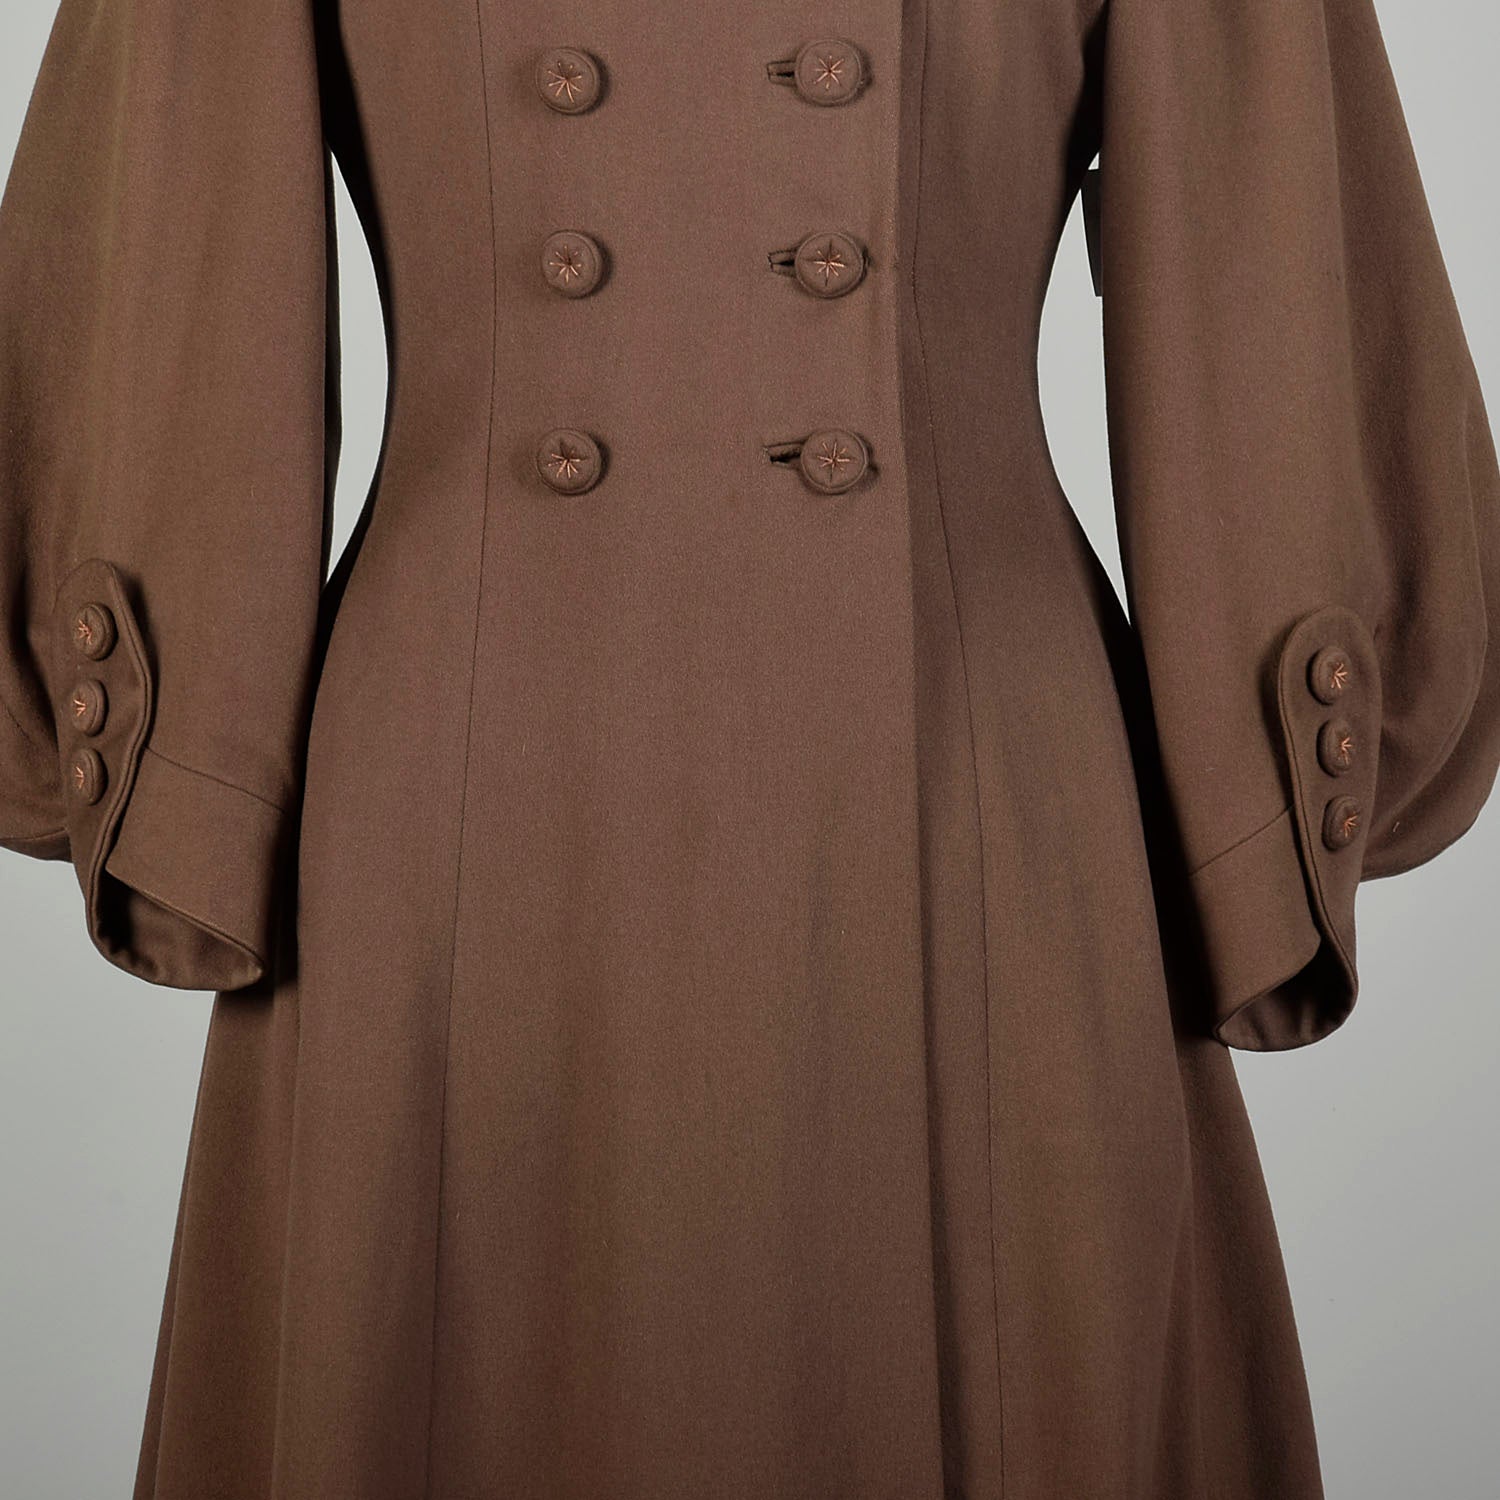 XXS 1940s Princess Coat  Light Brown Statement Sleeves Sheared Fur Collar Double Breasted